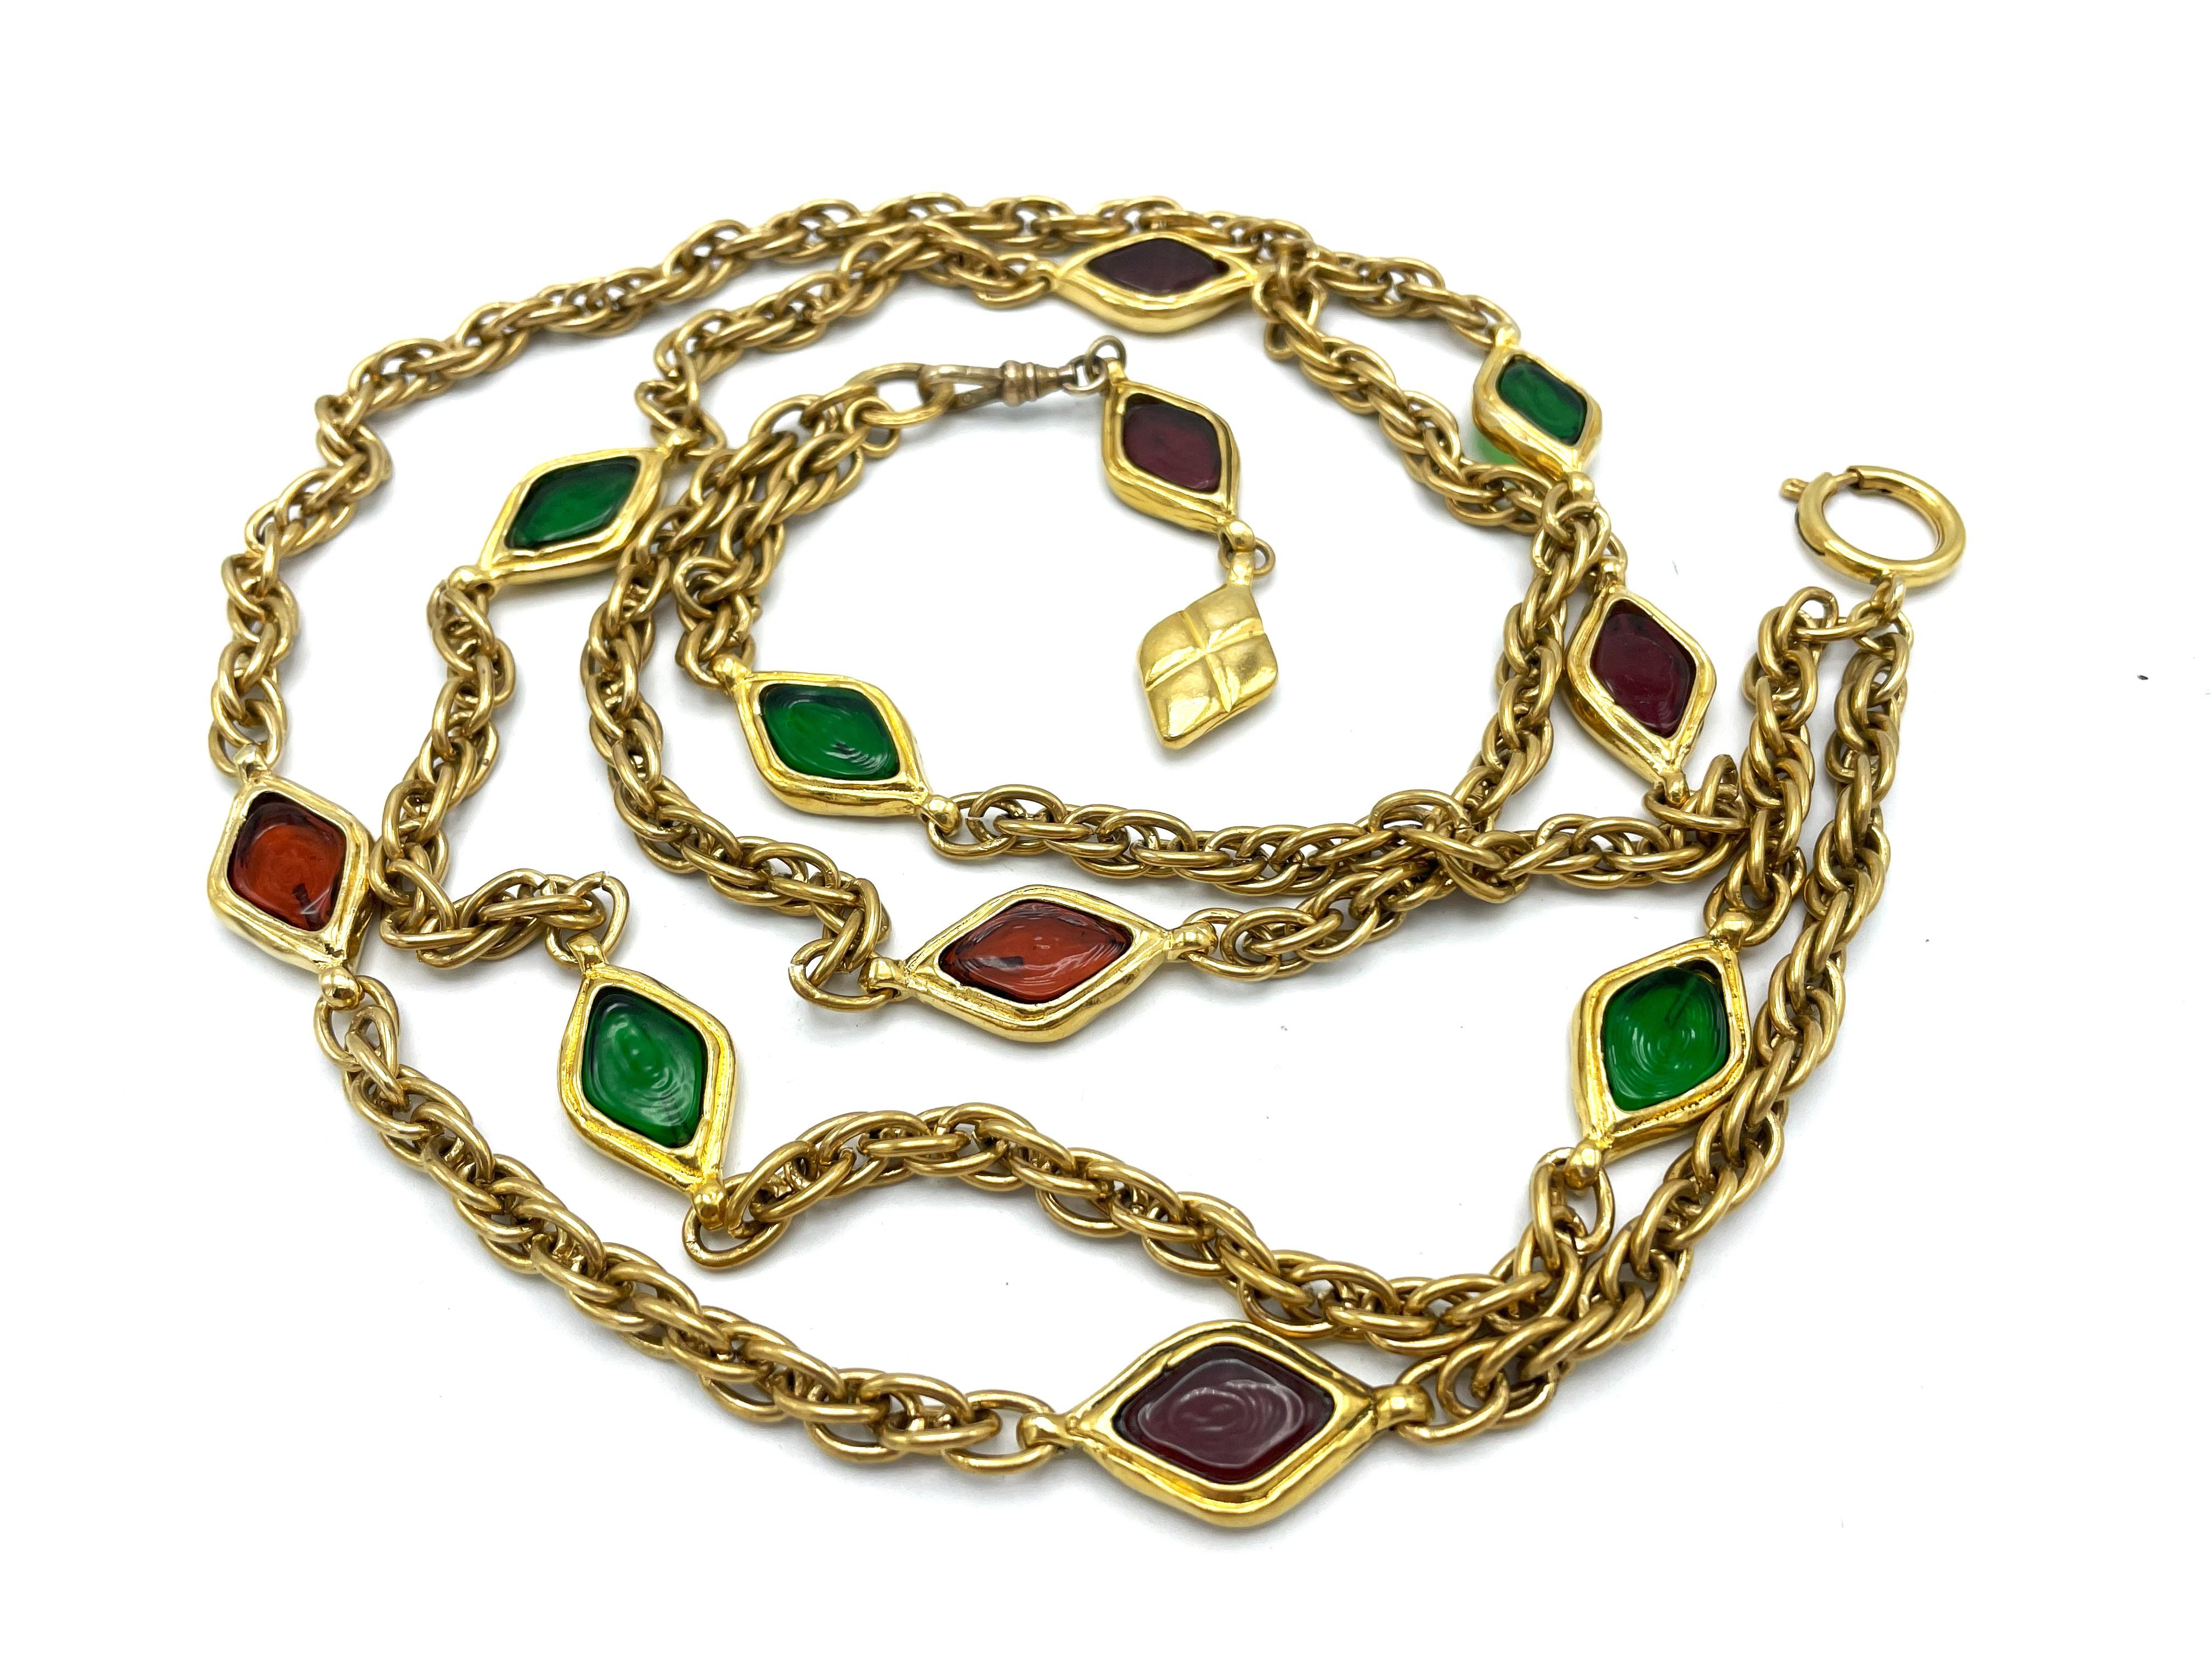  2 row Chanel necklace with red and green pate the verre, gold plated, 1970/80's For Sale 6